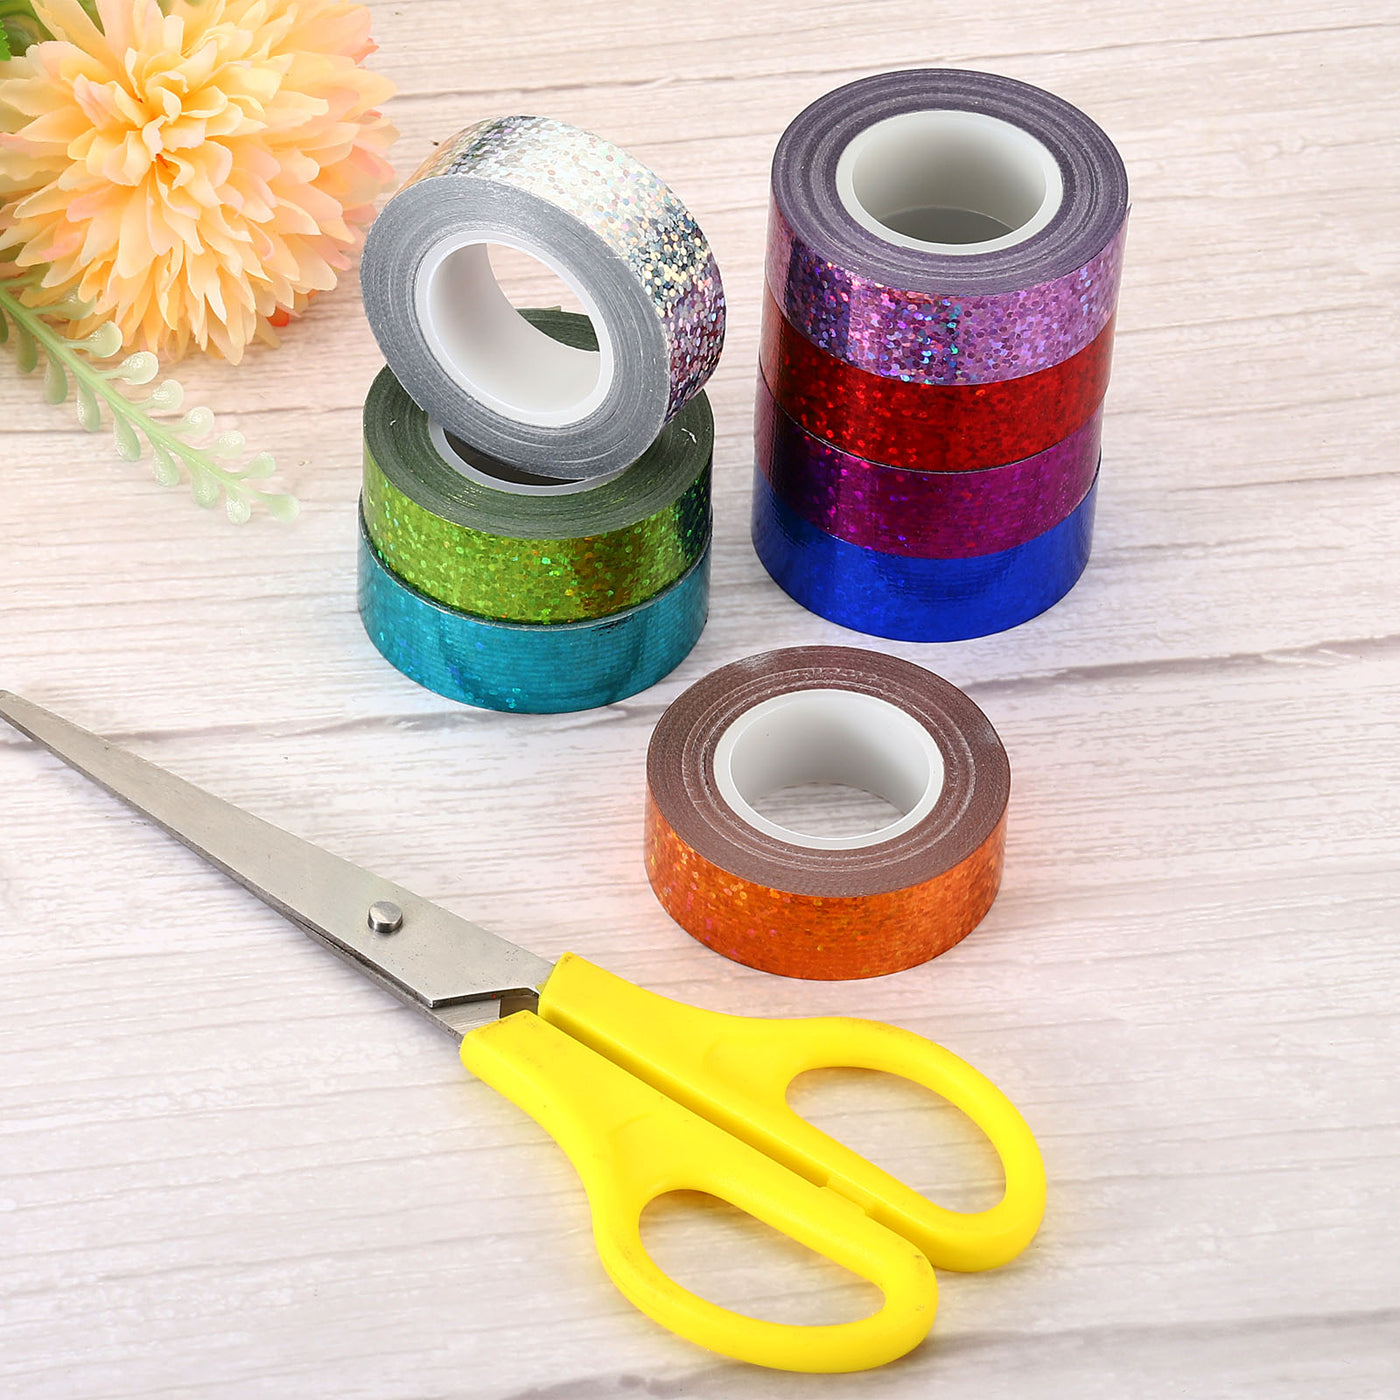 Harfington Sparkle Glitter Tape 15mm x 5m, 4 Pack Art Prism Tapes Self-Adhesive Green